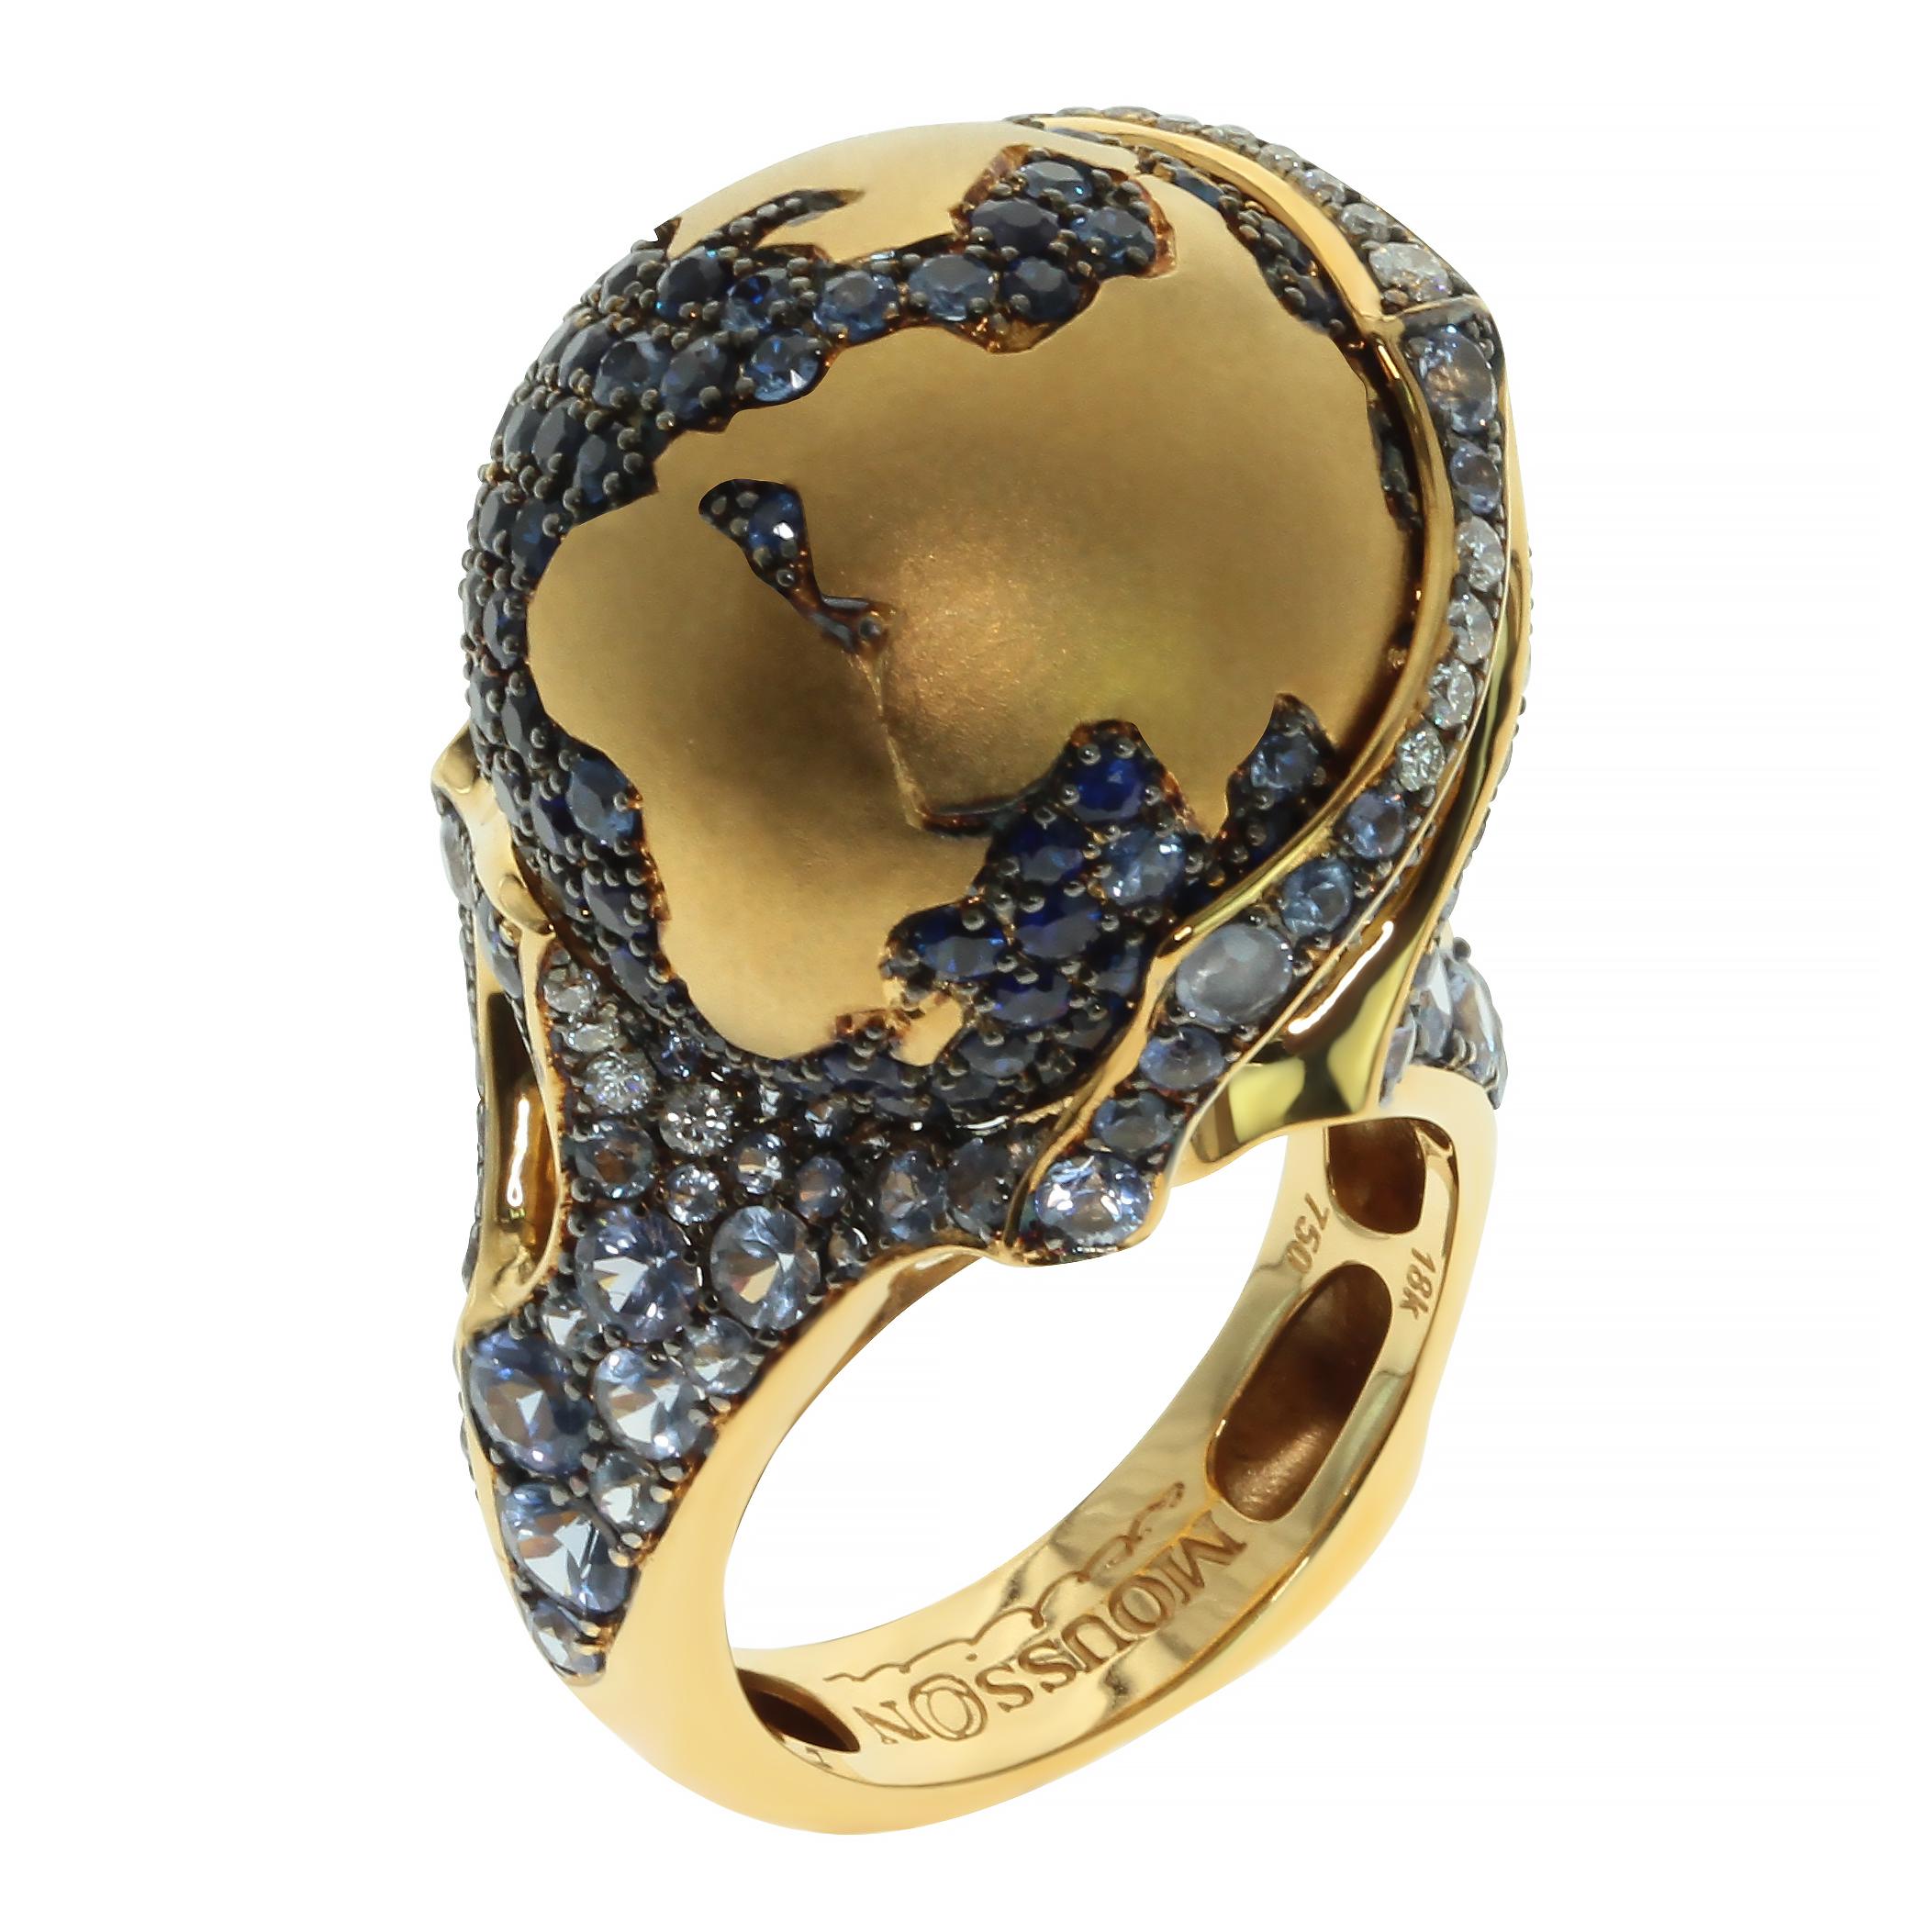 Globe Ring Diamonds Sapphire 18 Karat Yellow Gold
Would you like to have the whole world on your finger? You have this opportunity. One of a kind Globe Ring have super-stylish Design, setted with five-color blue Sapphires and Diamonds. Globe is